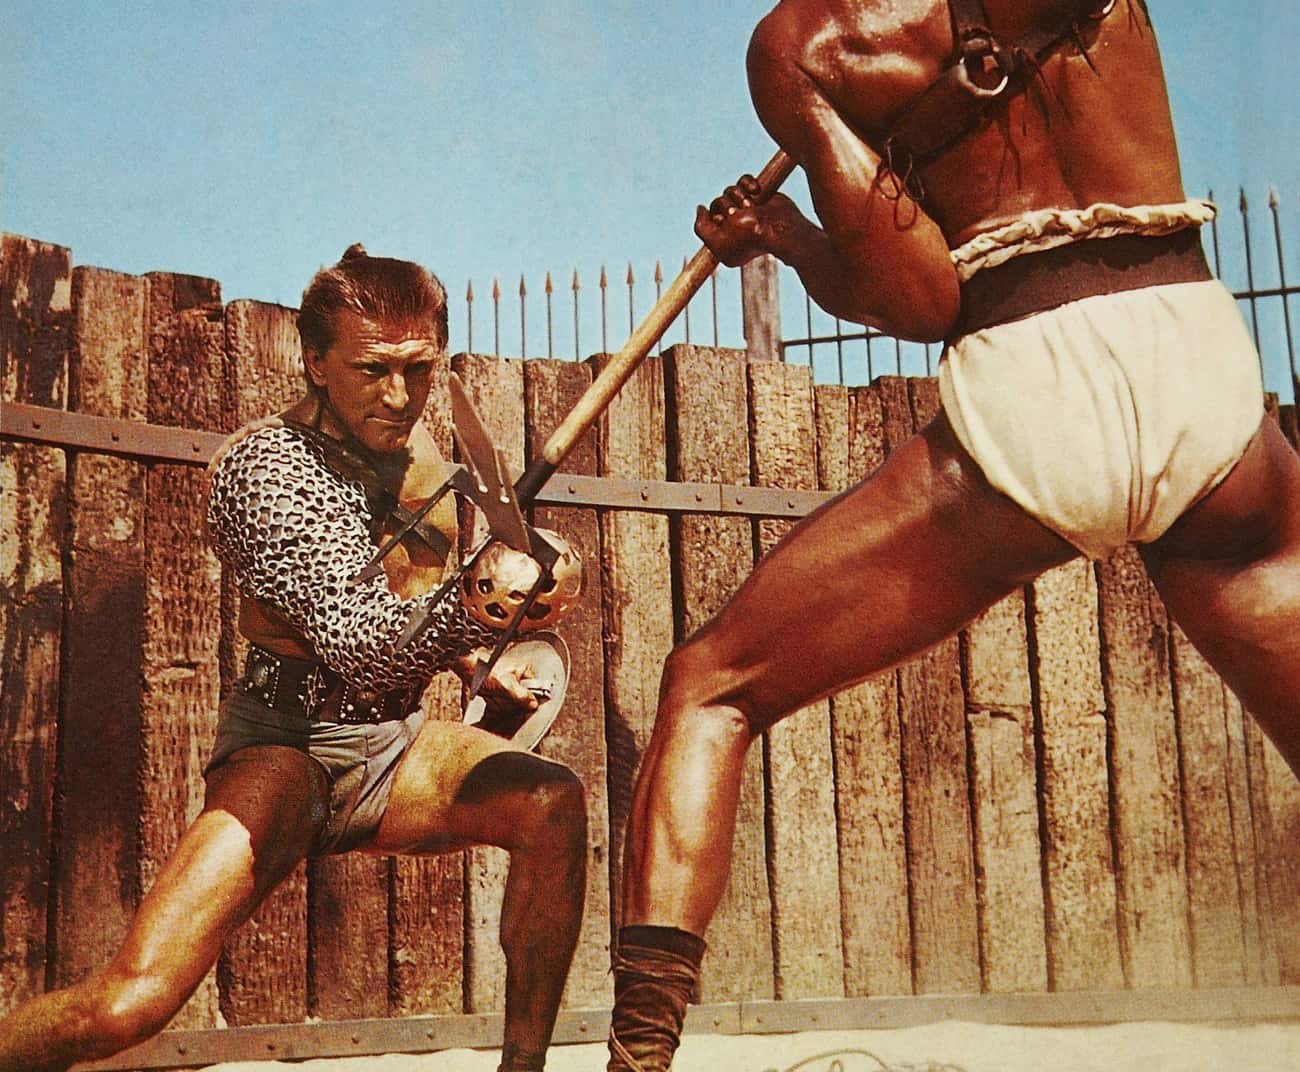 Spartacus Might Have Been An Ex-Soldier Who Turned On Rome